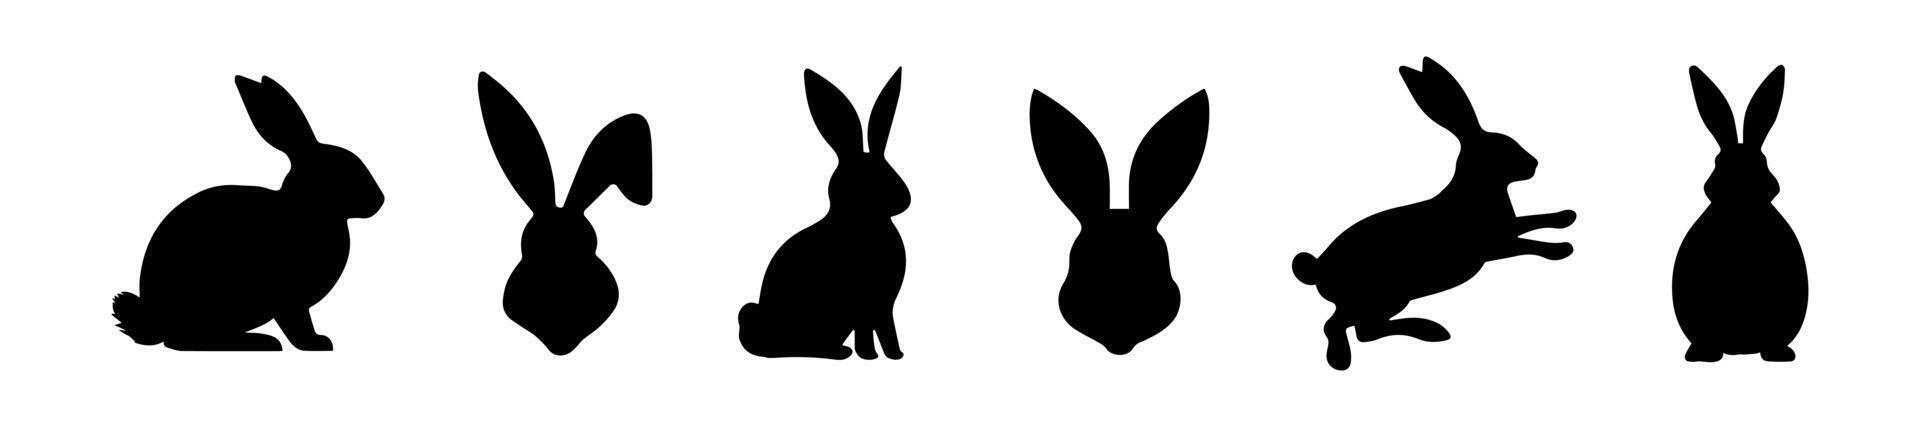 Set of Rabbit silhouettes. Easter bunnies. Isolated on a white background. A simple black icons of hares. Cute animals. Ideal for logo, emblem, pictogram, print, design element for greeting card. vector